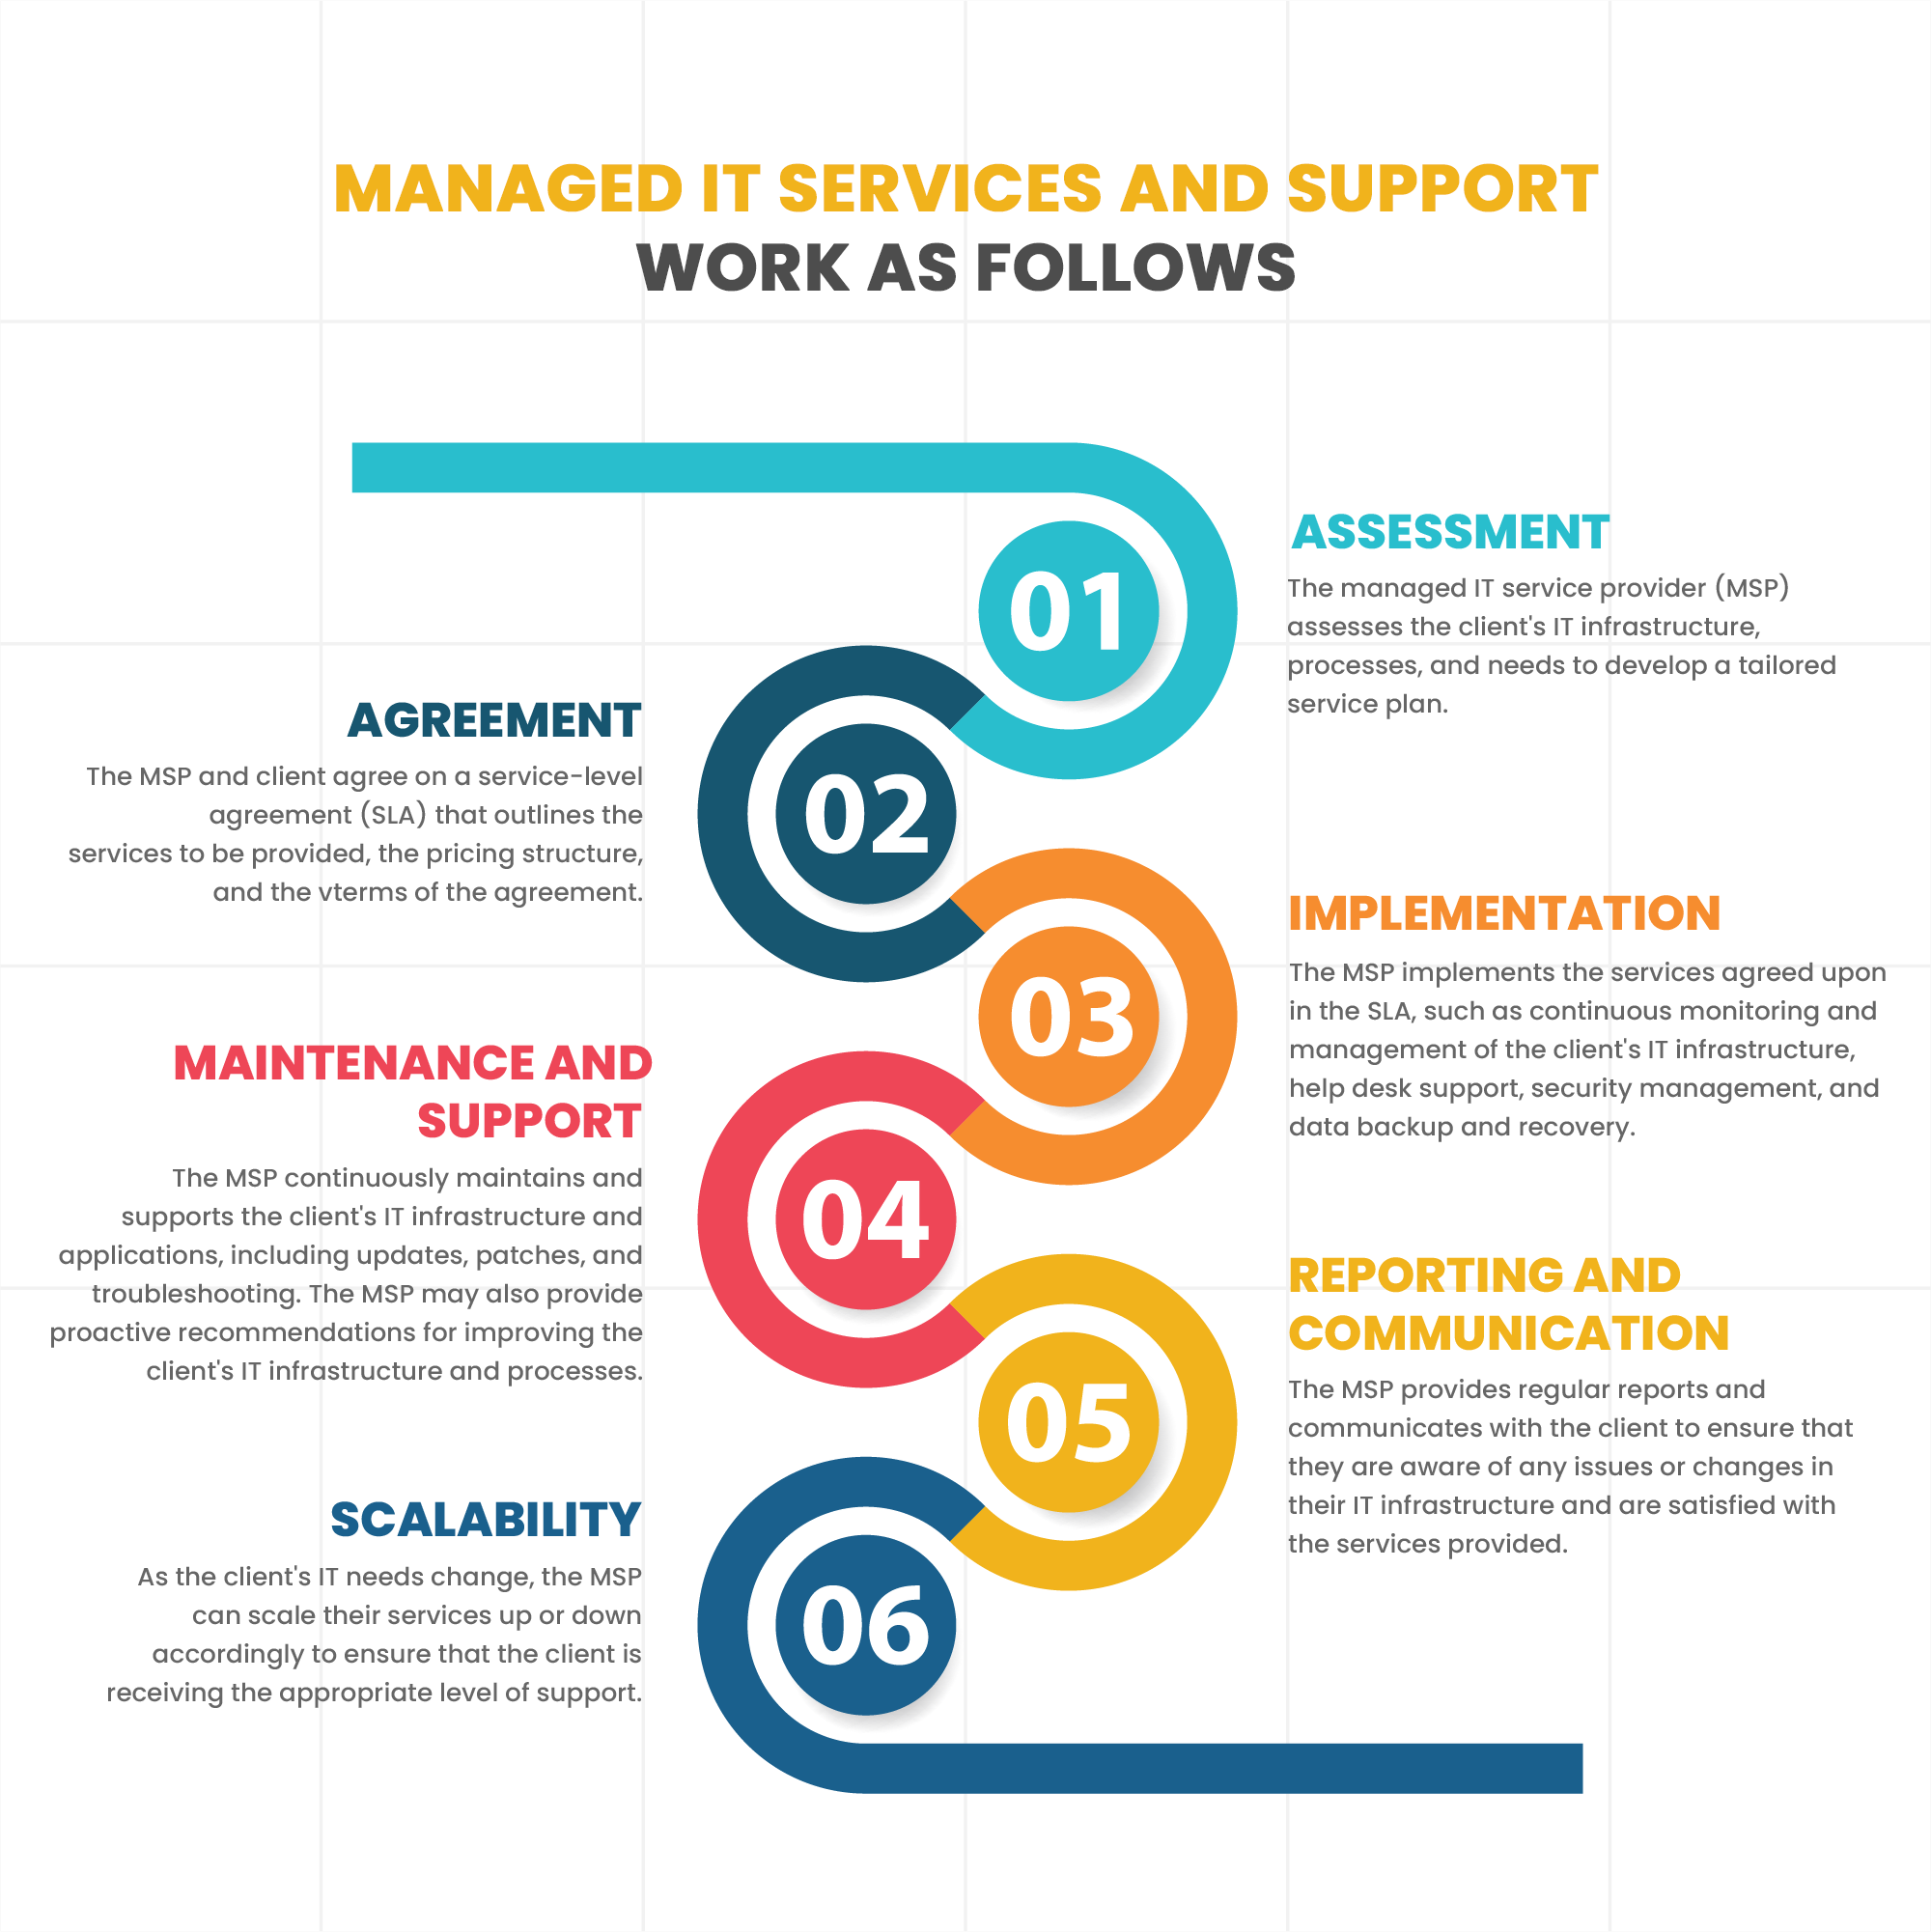 The process of managed IT services and support